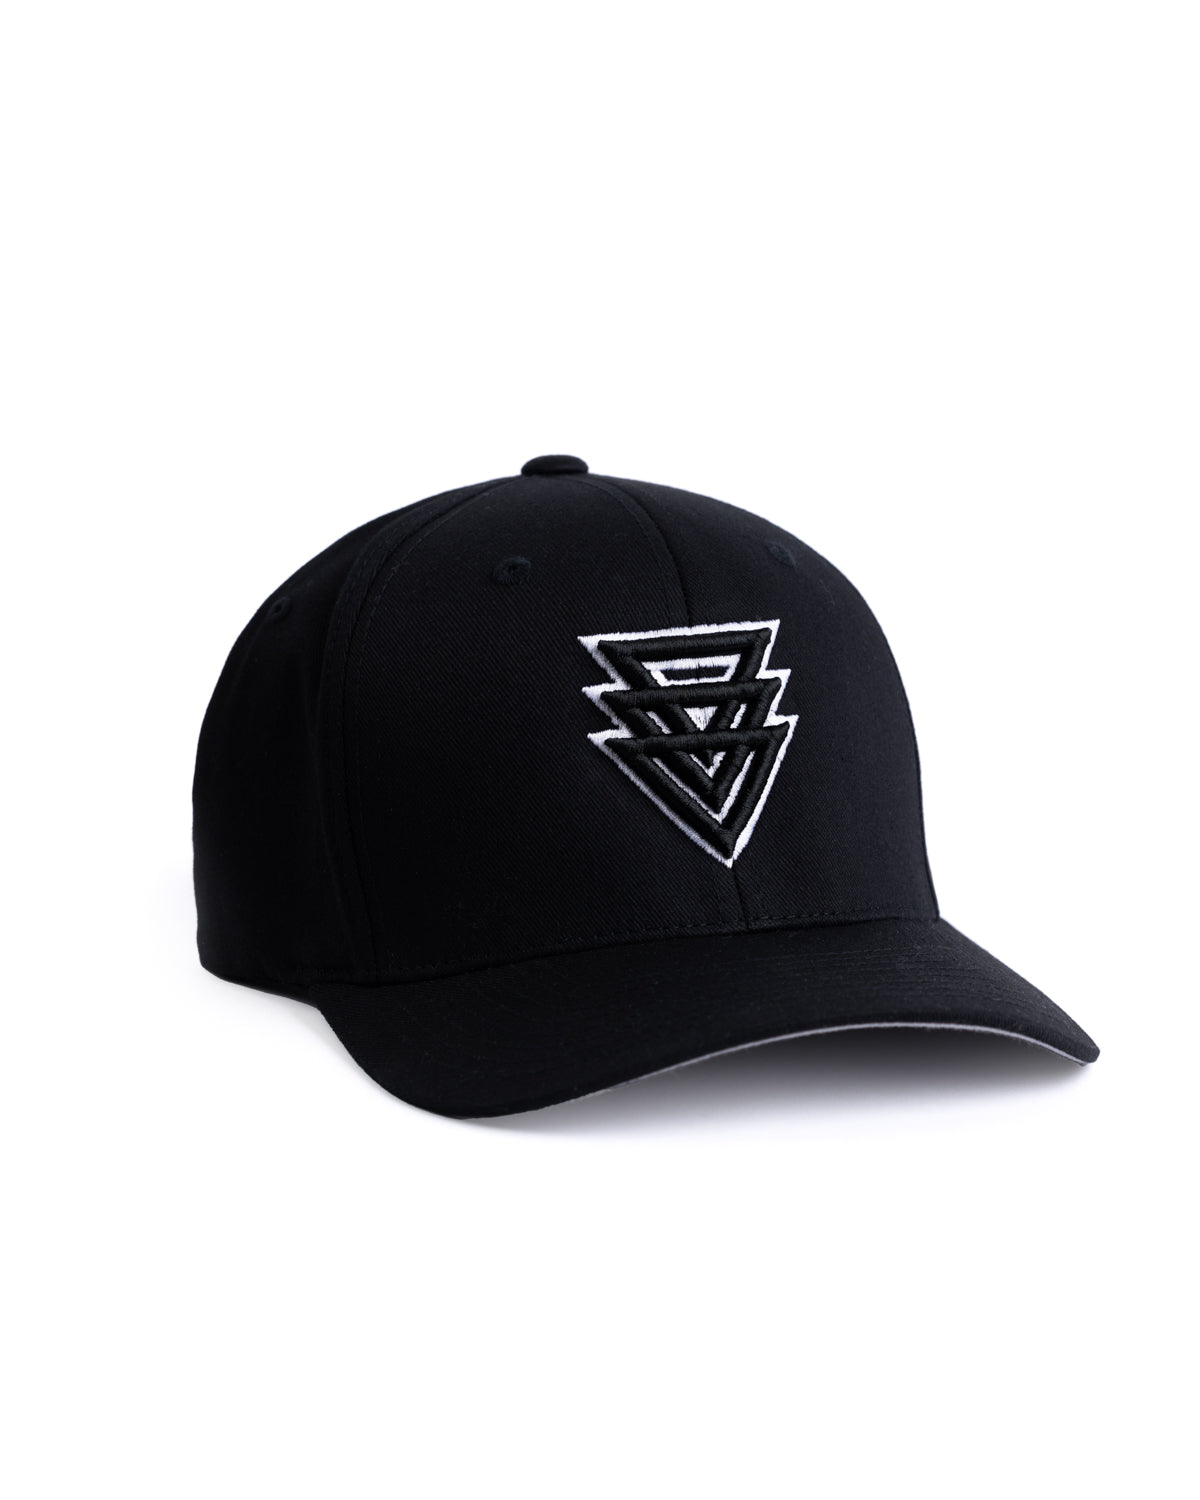 TRIANGLES FITTED BLACK